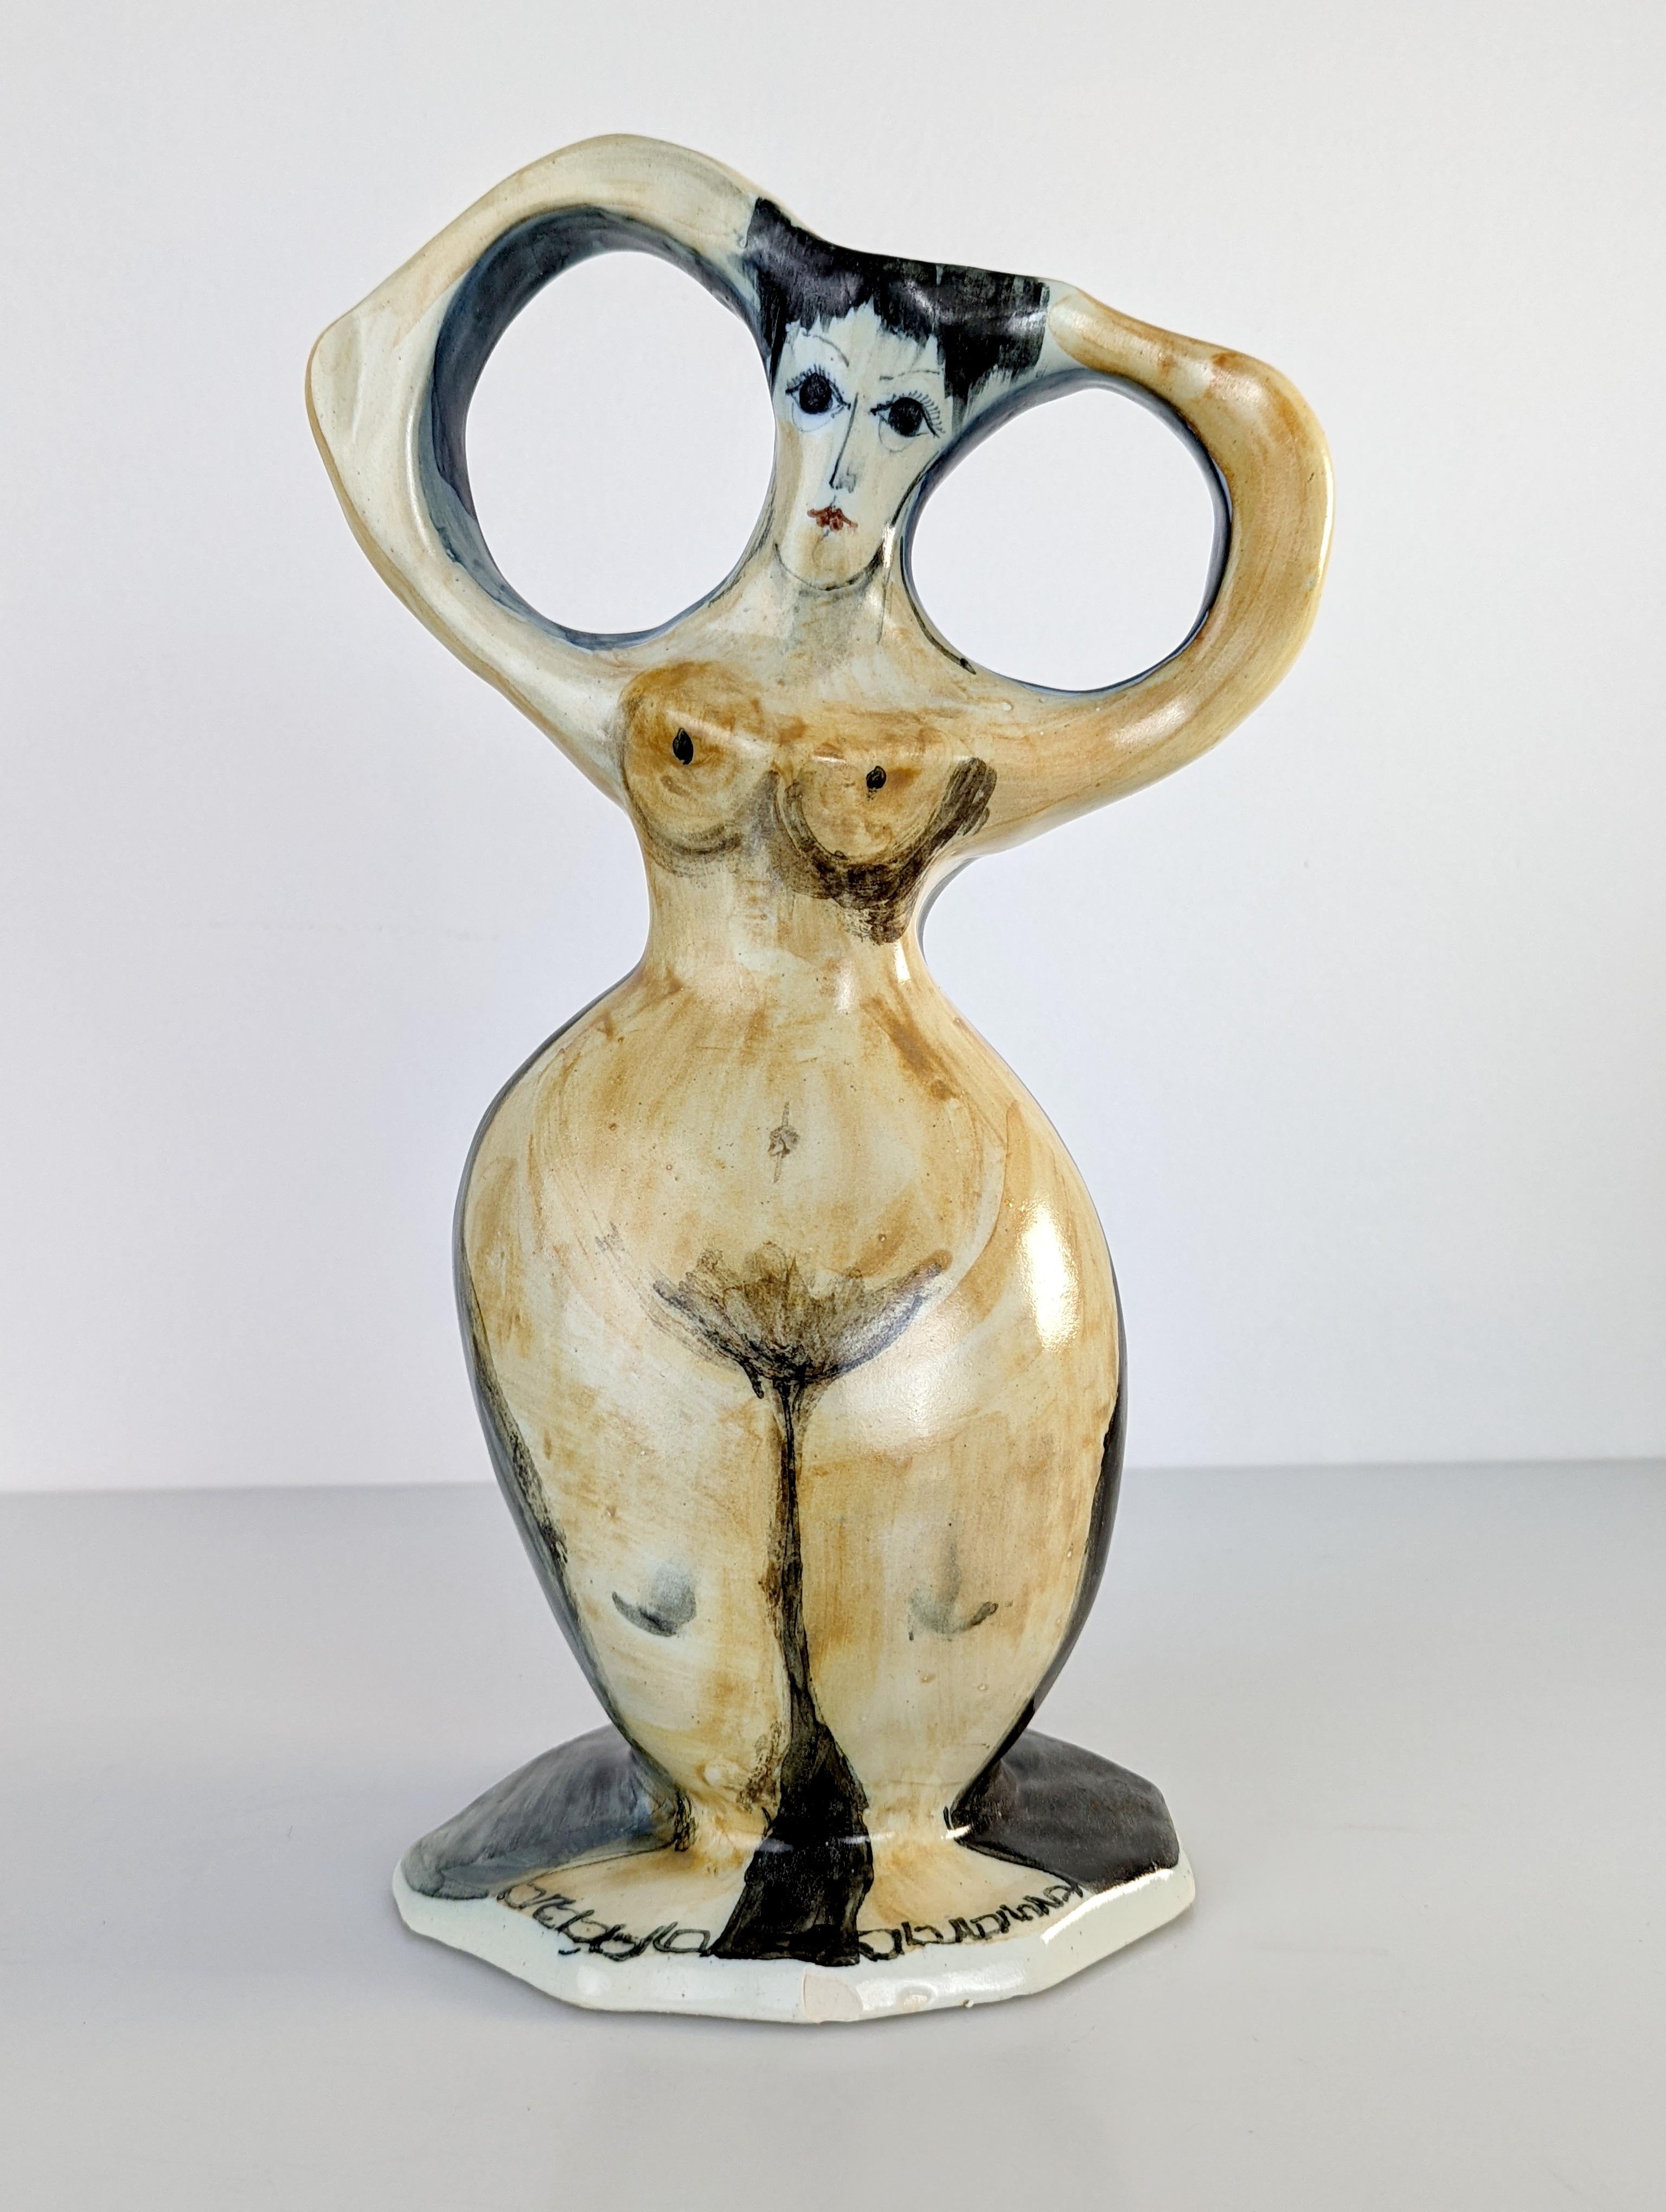 Extraordinary figurative piece of ceramics that represents a nude woman with really wonderful volumes and fantastic strokes reflecting the great skill and talent of the artist, hitherto unknown.